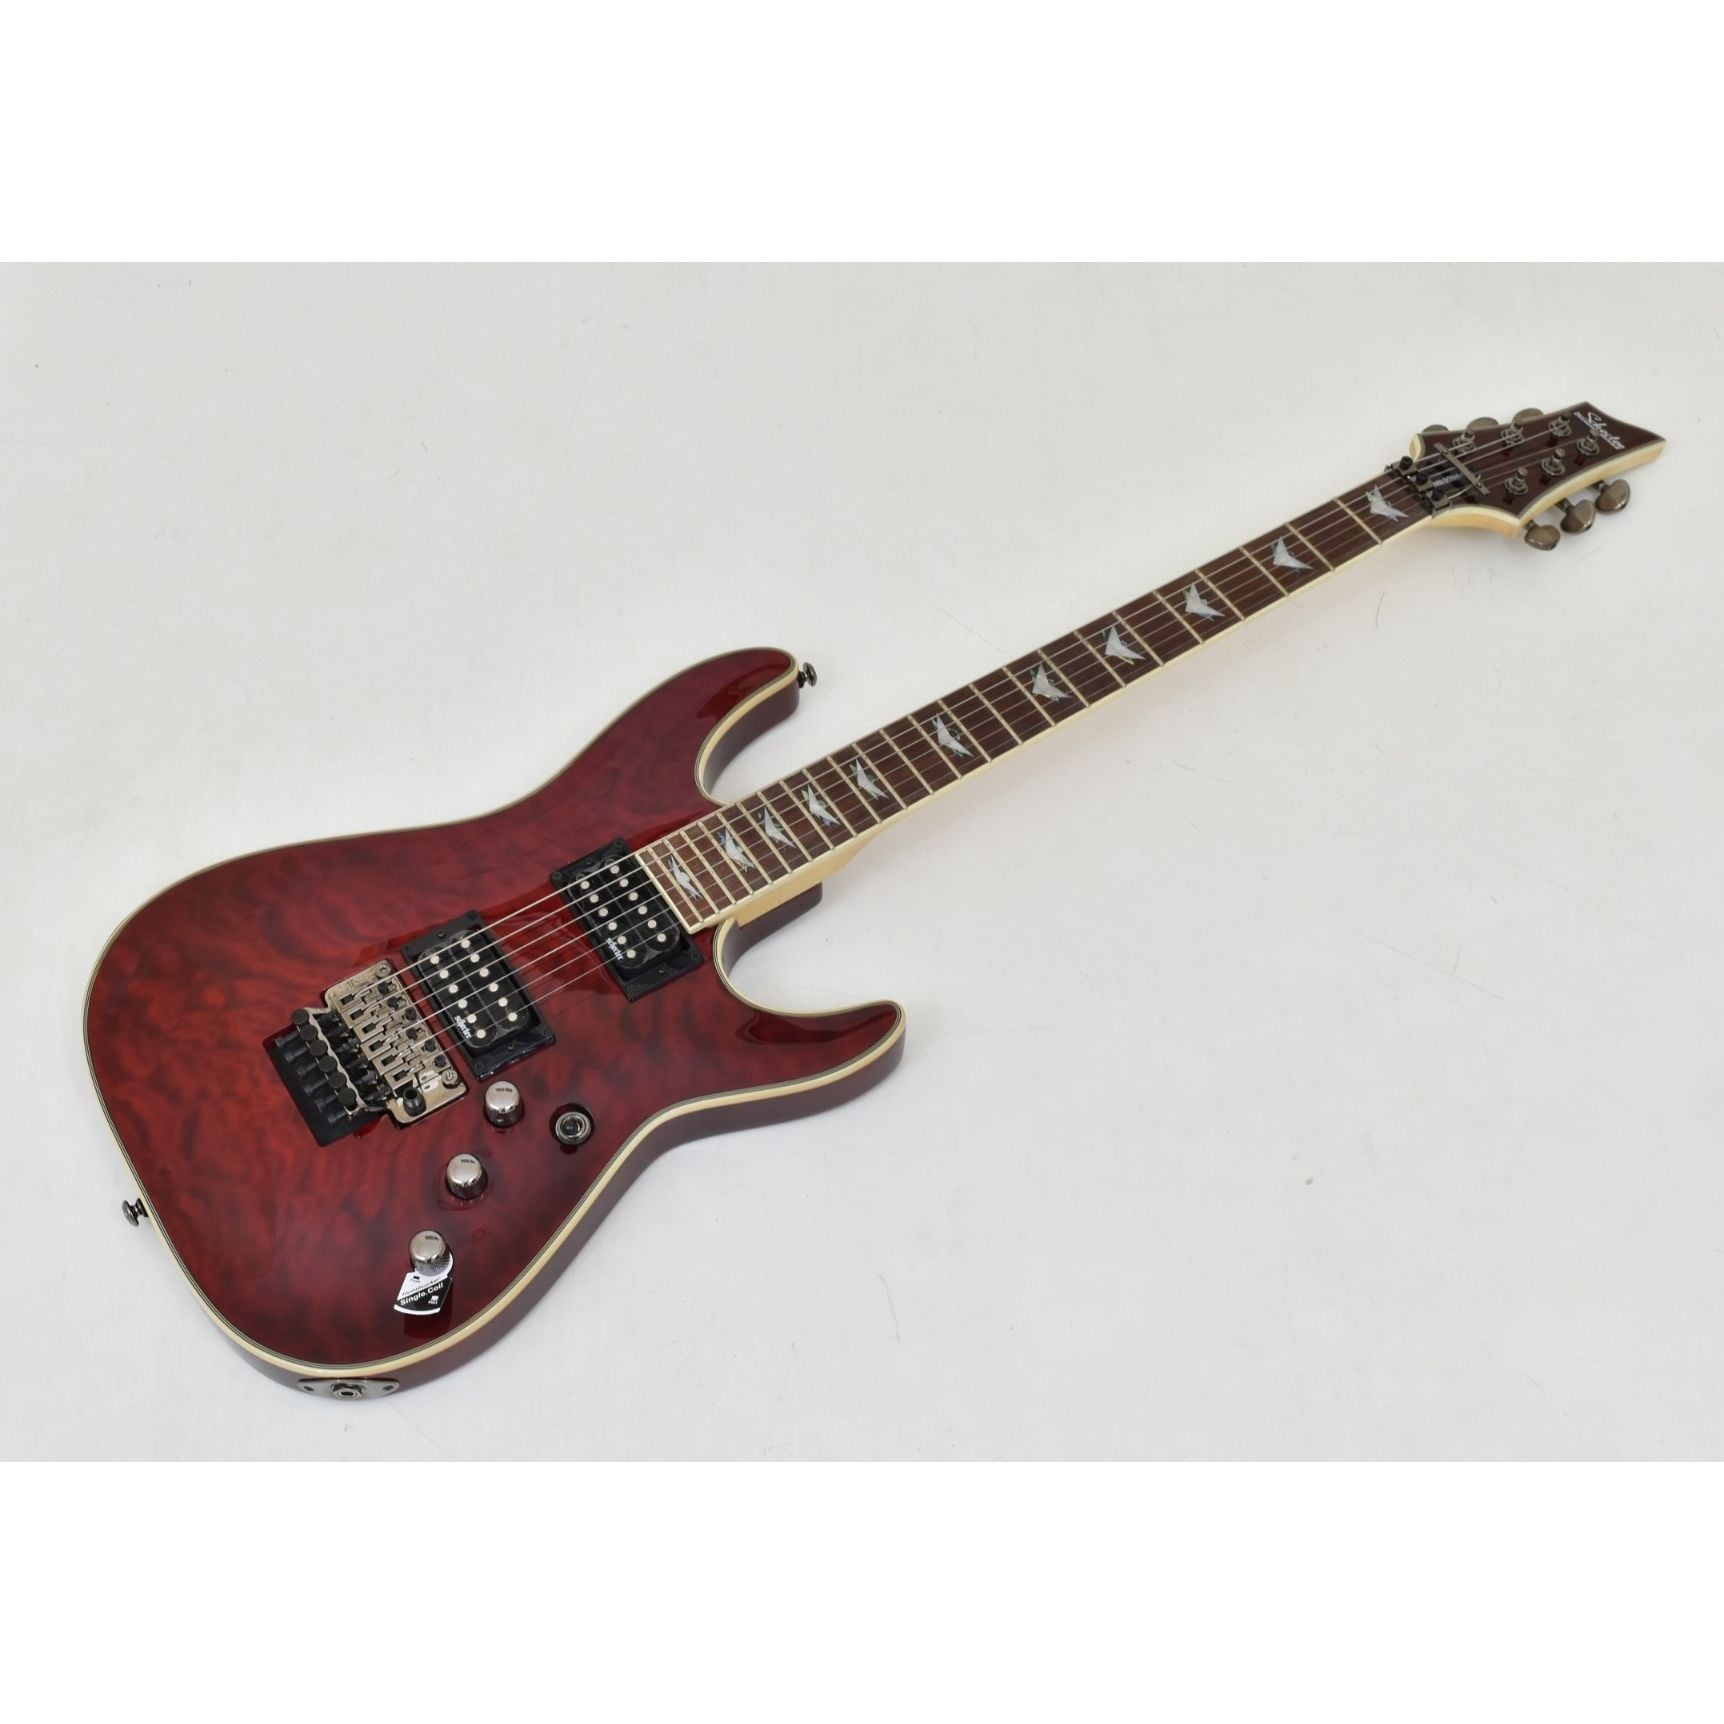 Schecter Omen Extreme-FR Electric Guitar in Black Cherry Finish 0317